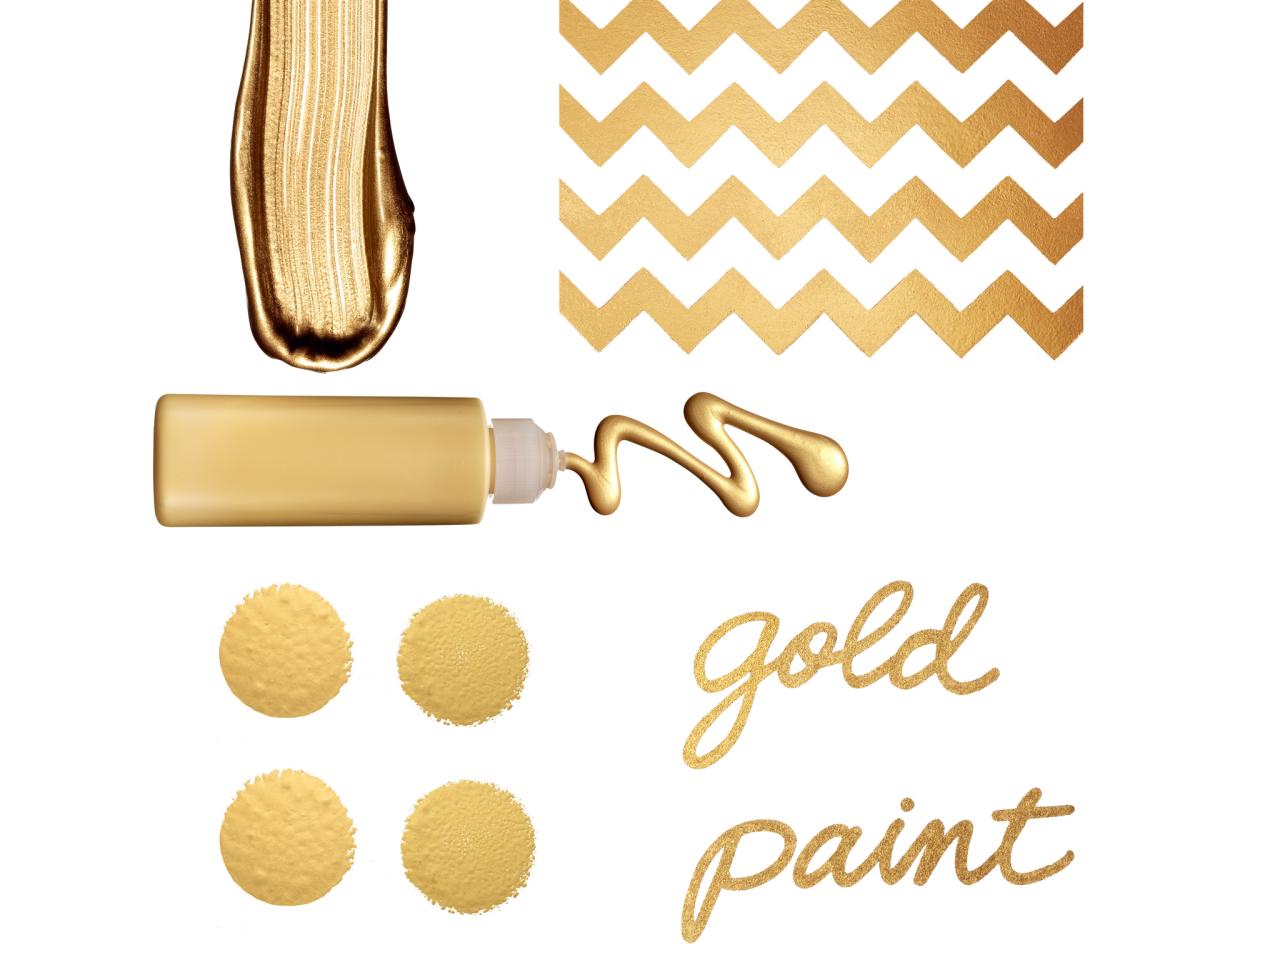 What Colors Make Gold? How To Make Gold Paint For Personal Use